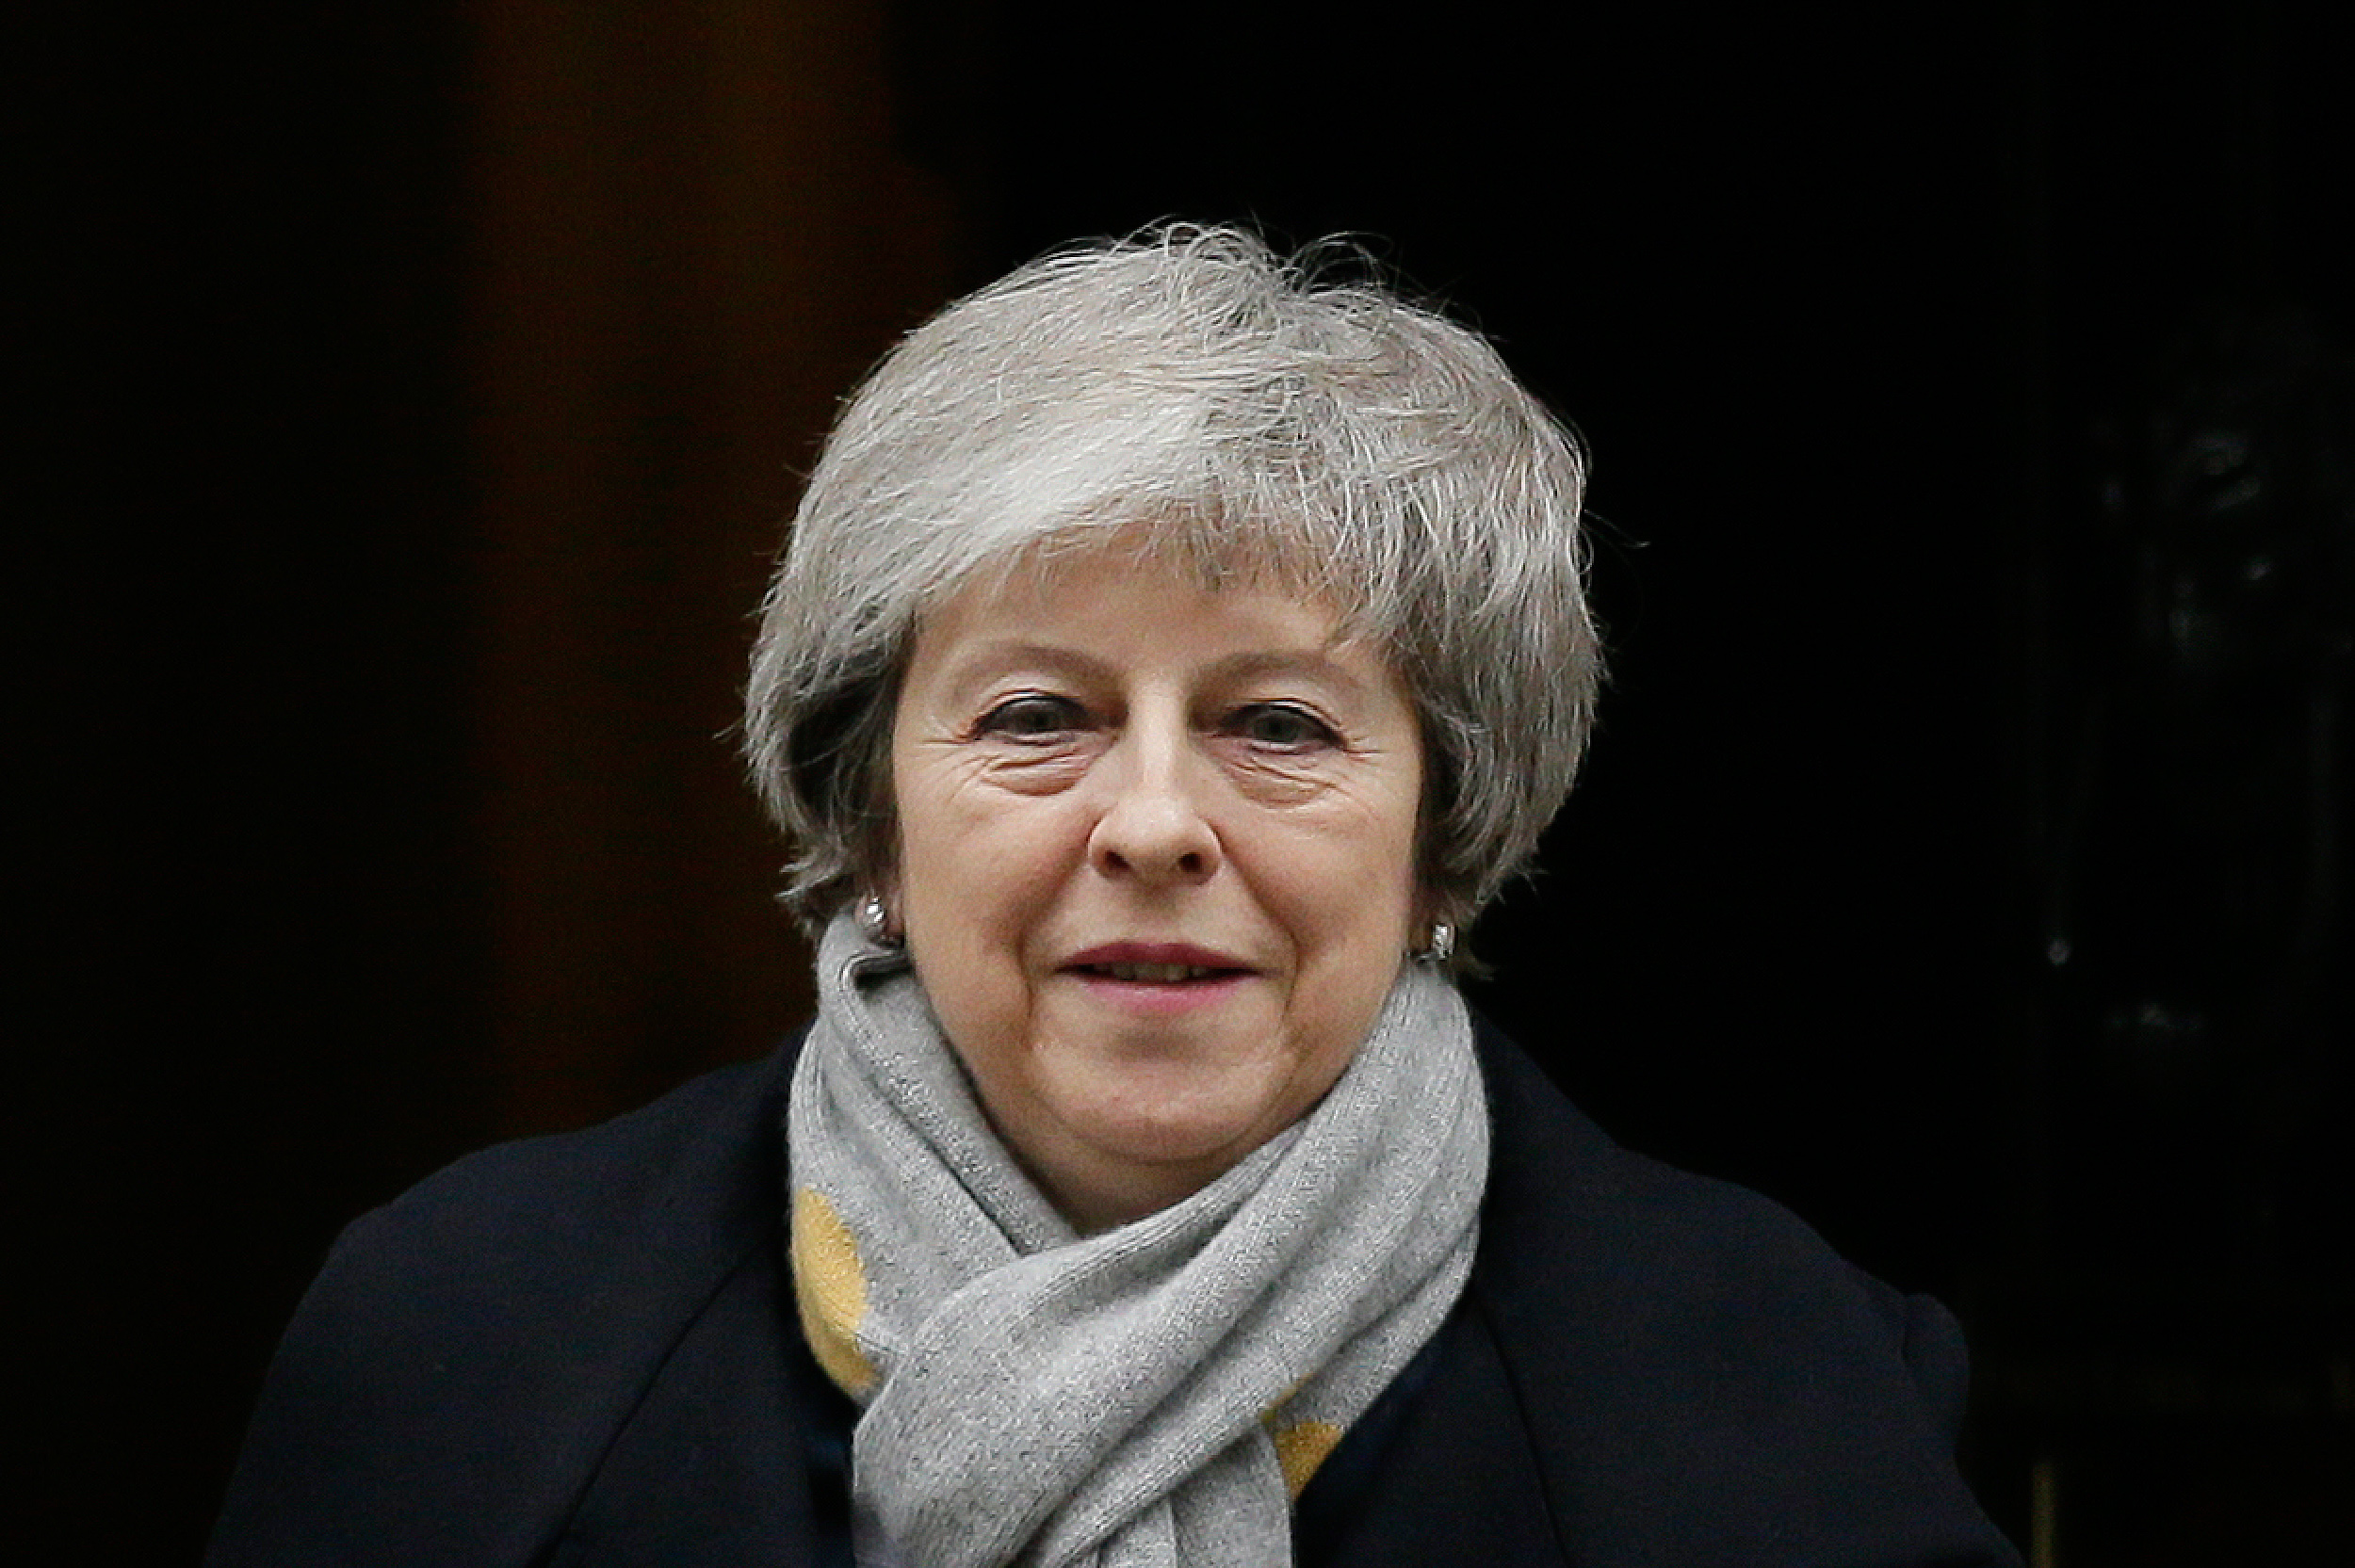 PM May calls down on fresh elections after disastrous defeat in Brexit vote